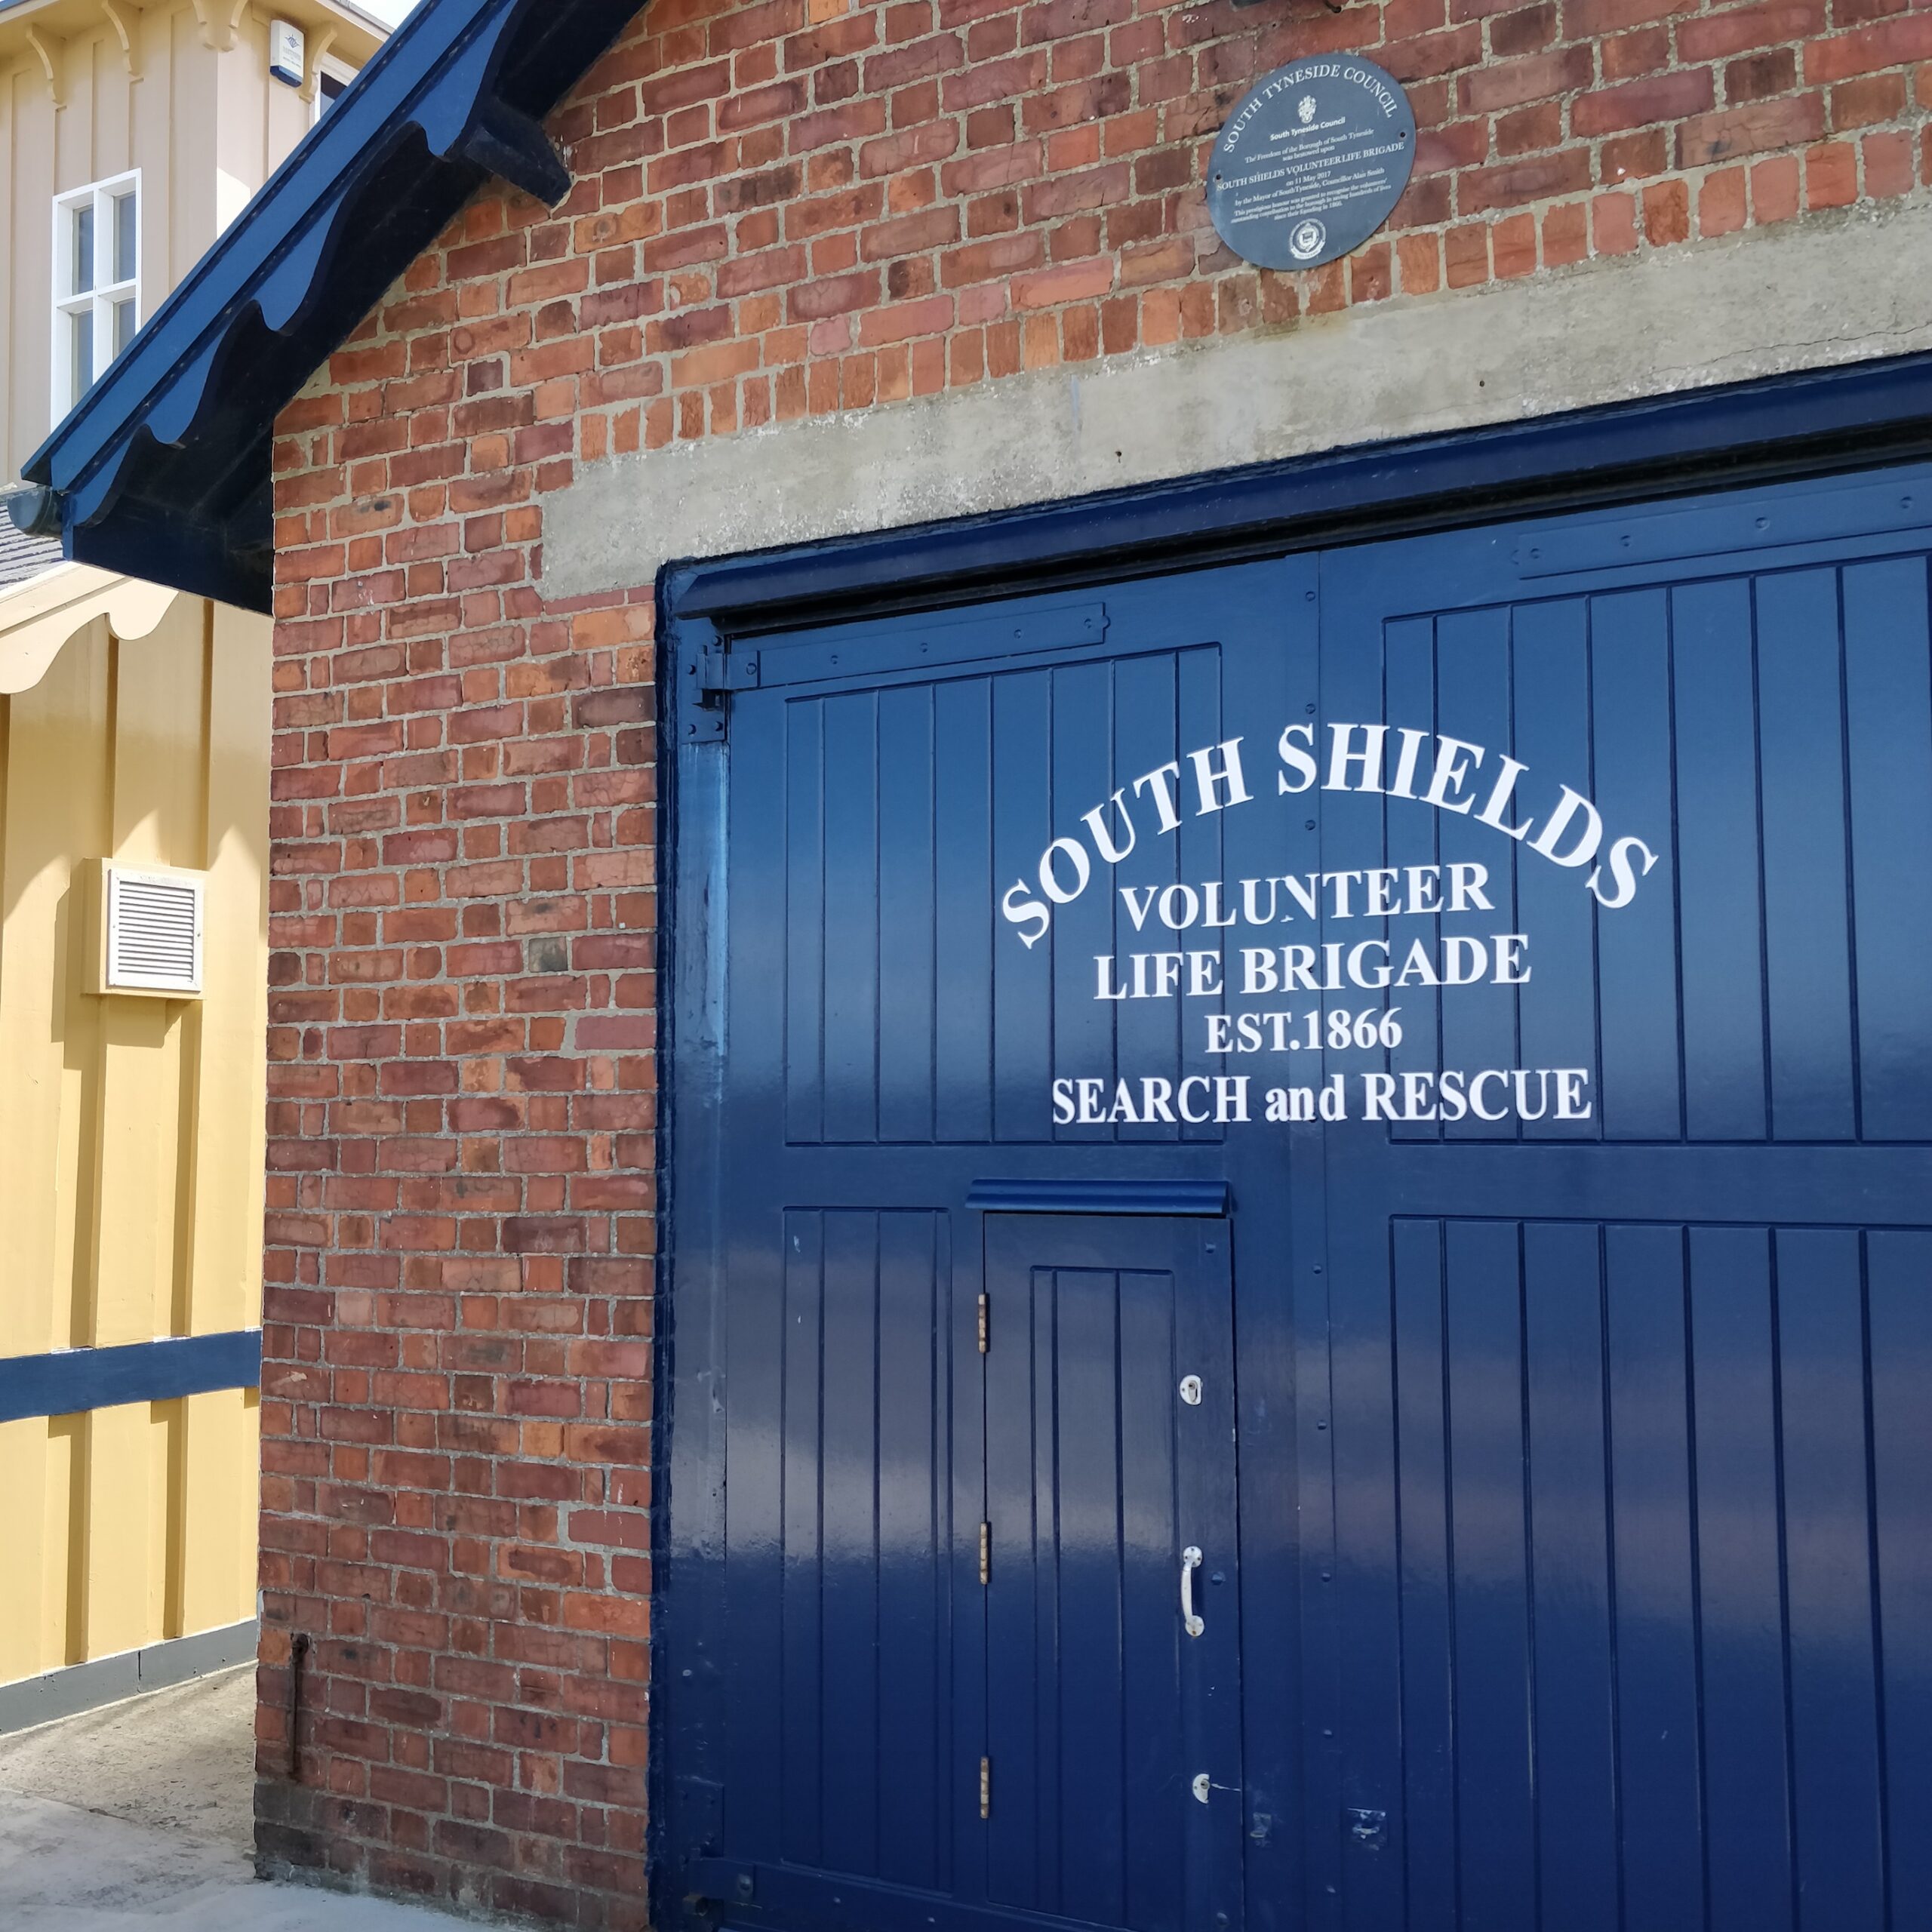 A picture of the blue boat house door of South Shields Volunteer Life Brigade, located on the pier in South Shields